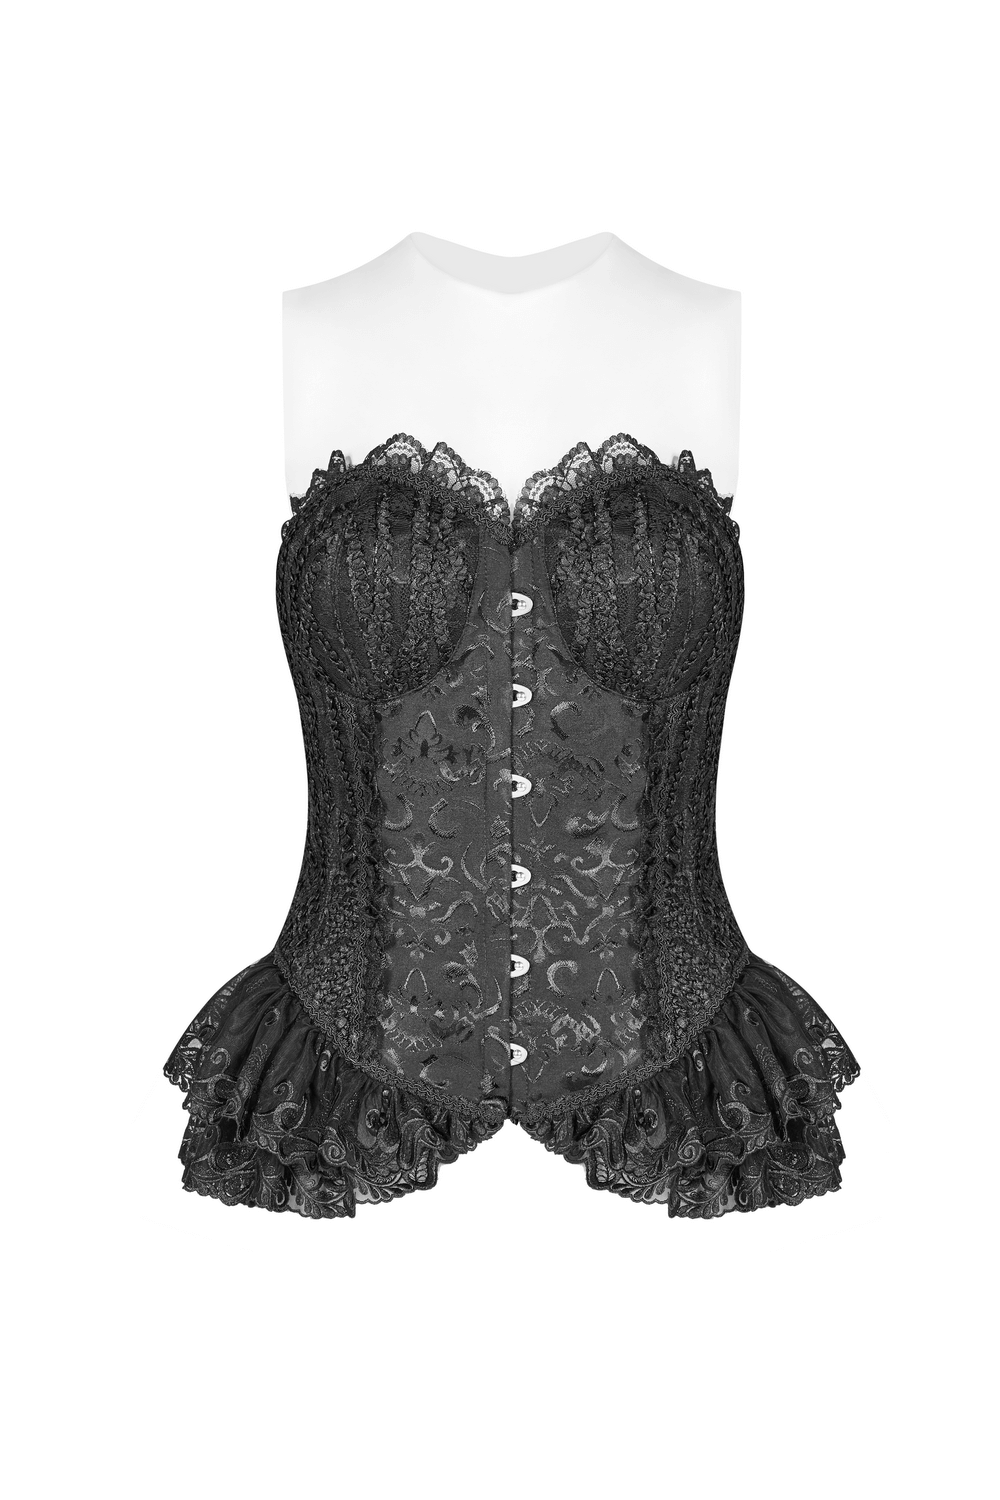 Elegant Lace Corset with Ruffled Hem and Intricate Details